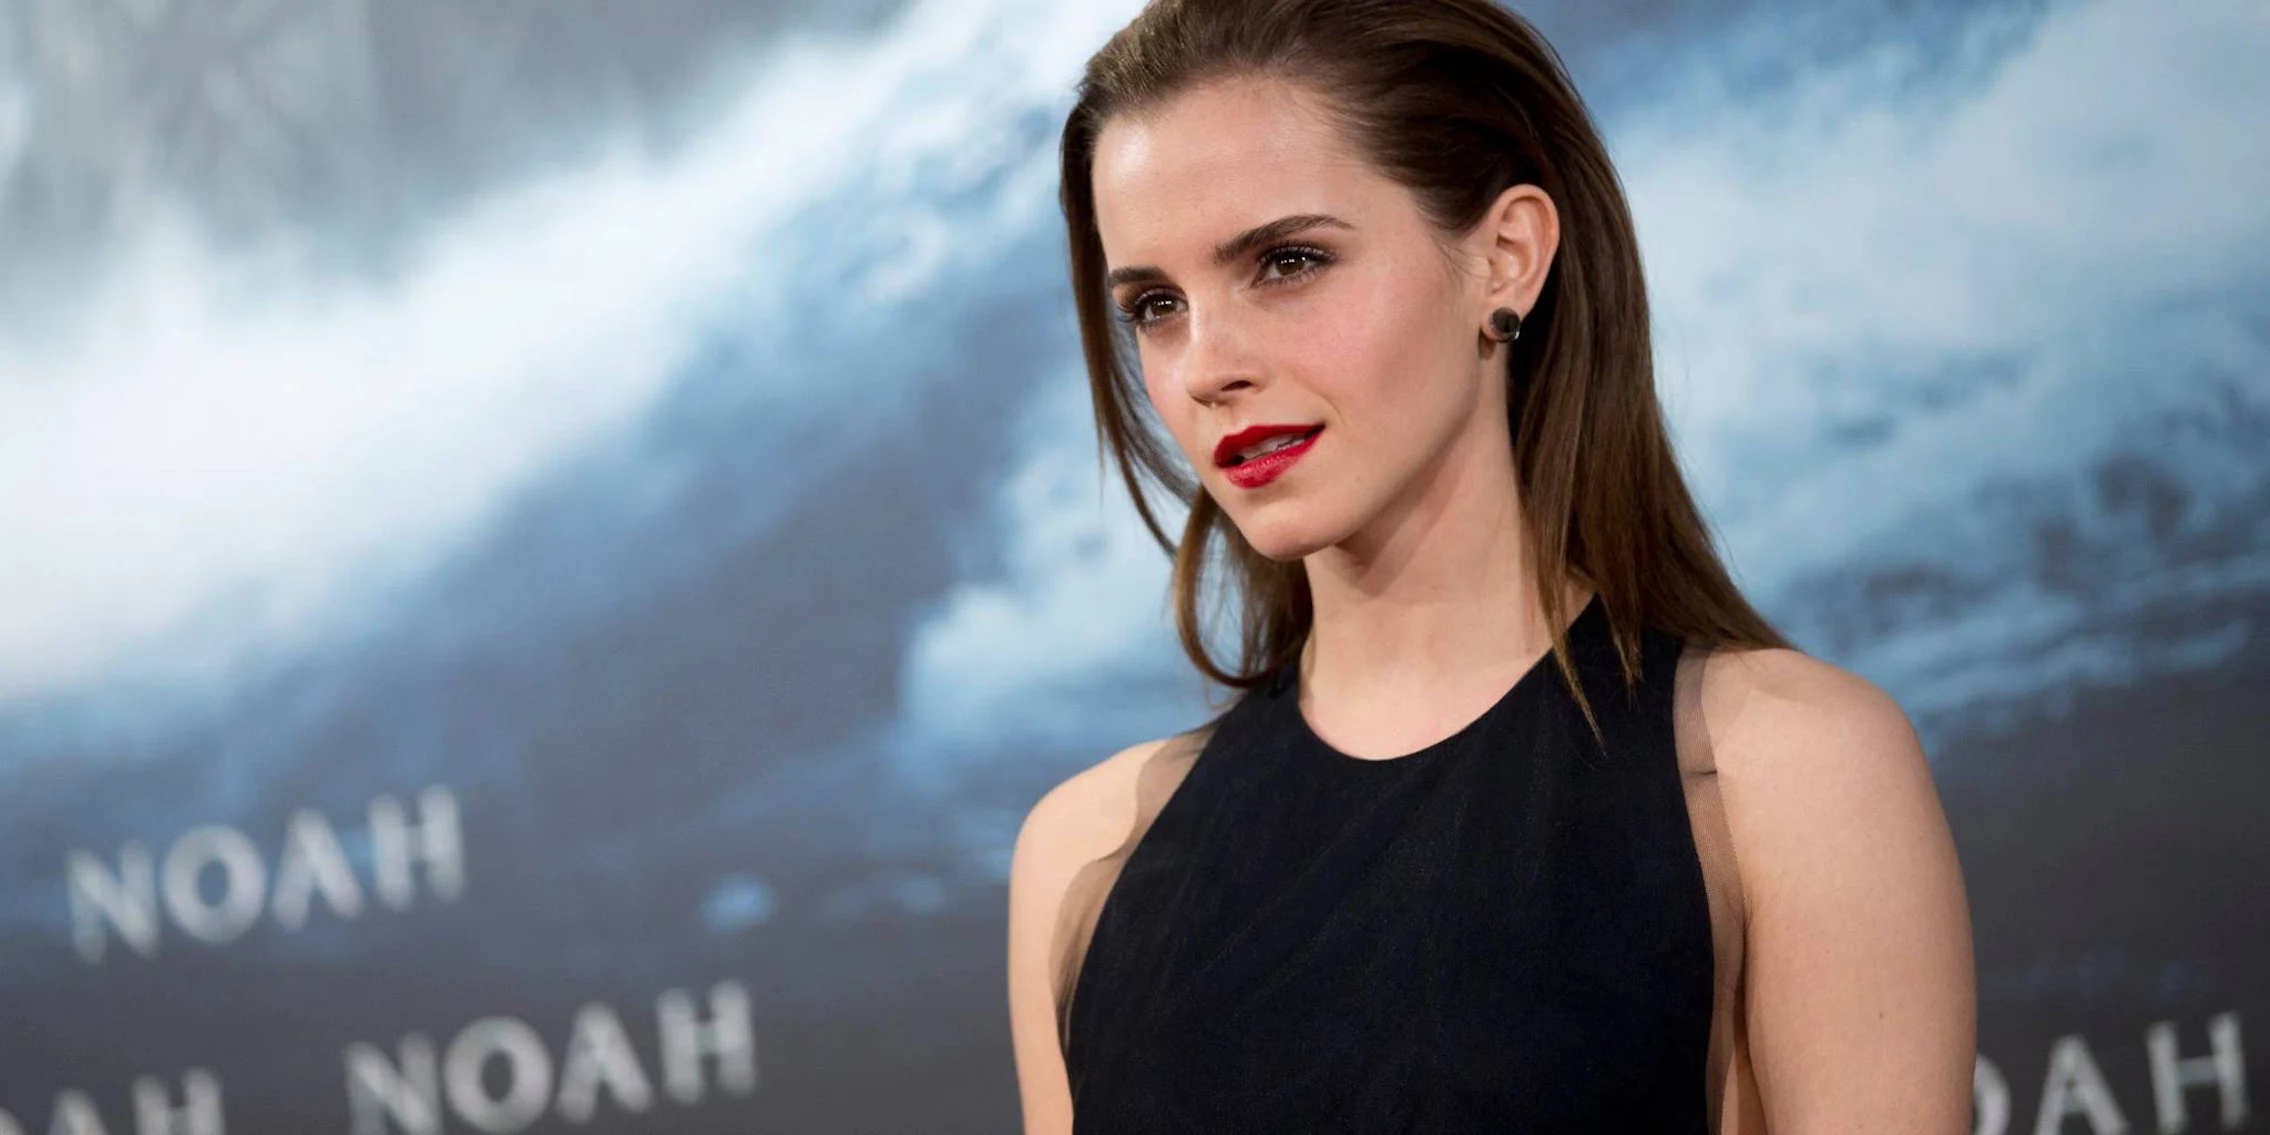 Which popular talk show host did Emma Watson interview for 'Our Shared Shelf' book club?